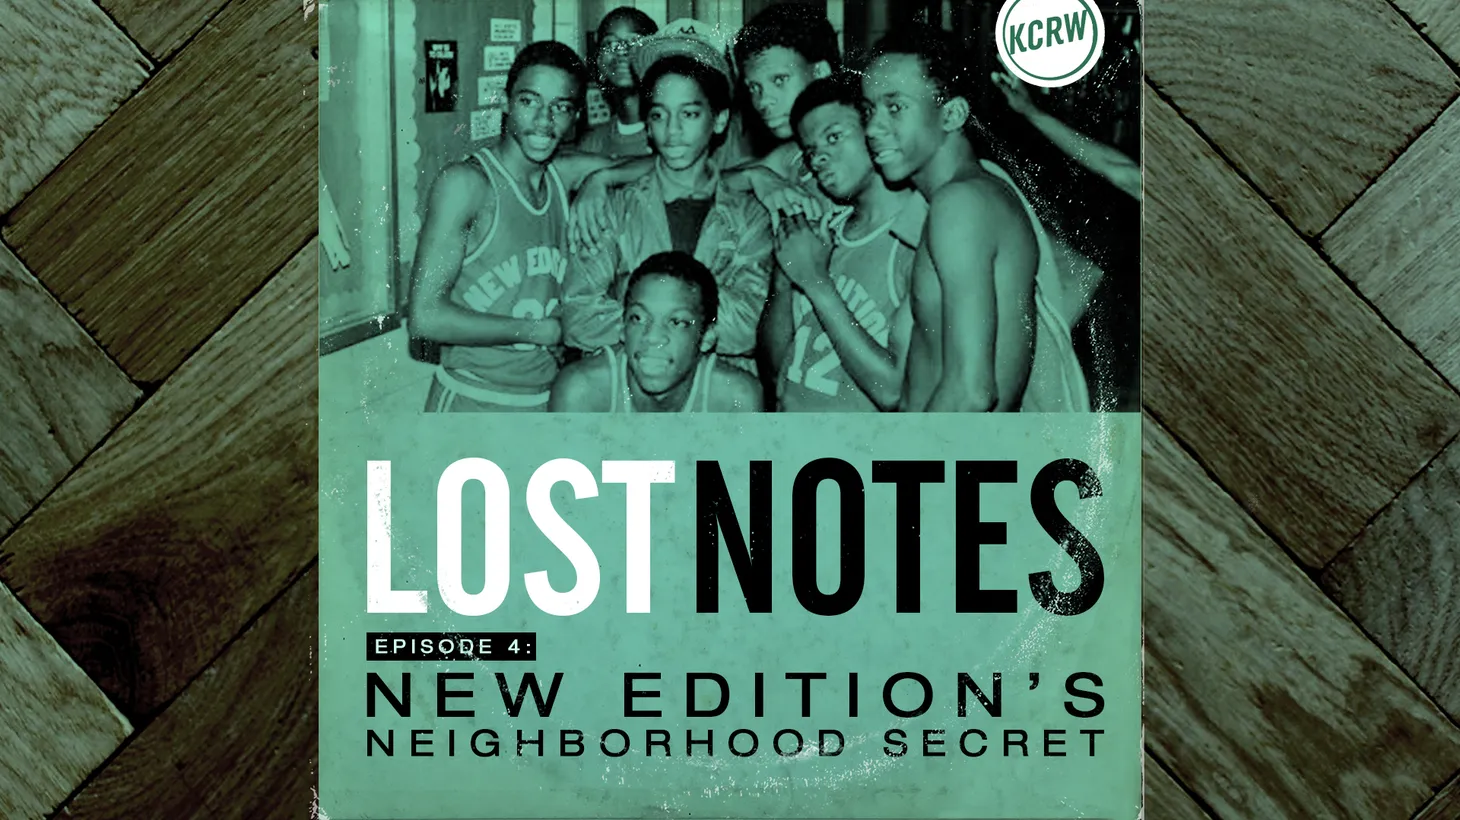 The boys in New Edition were basketball fans from Boston - Celtics country. So what happened when they hung out with the L.A. Lakers in a music video during the height of the 1980s Celtics/Lakers rivalry?